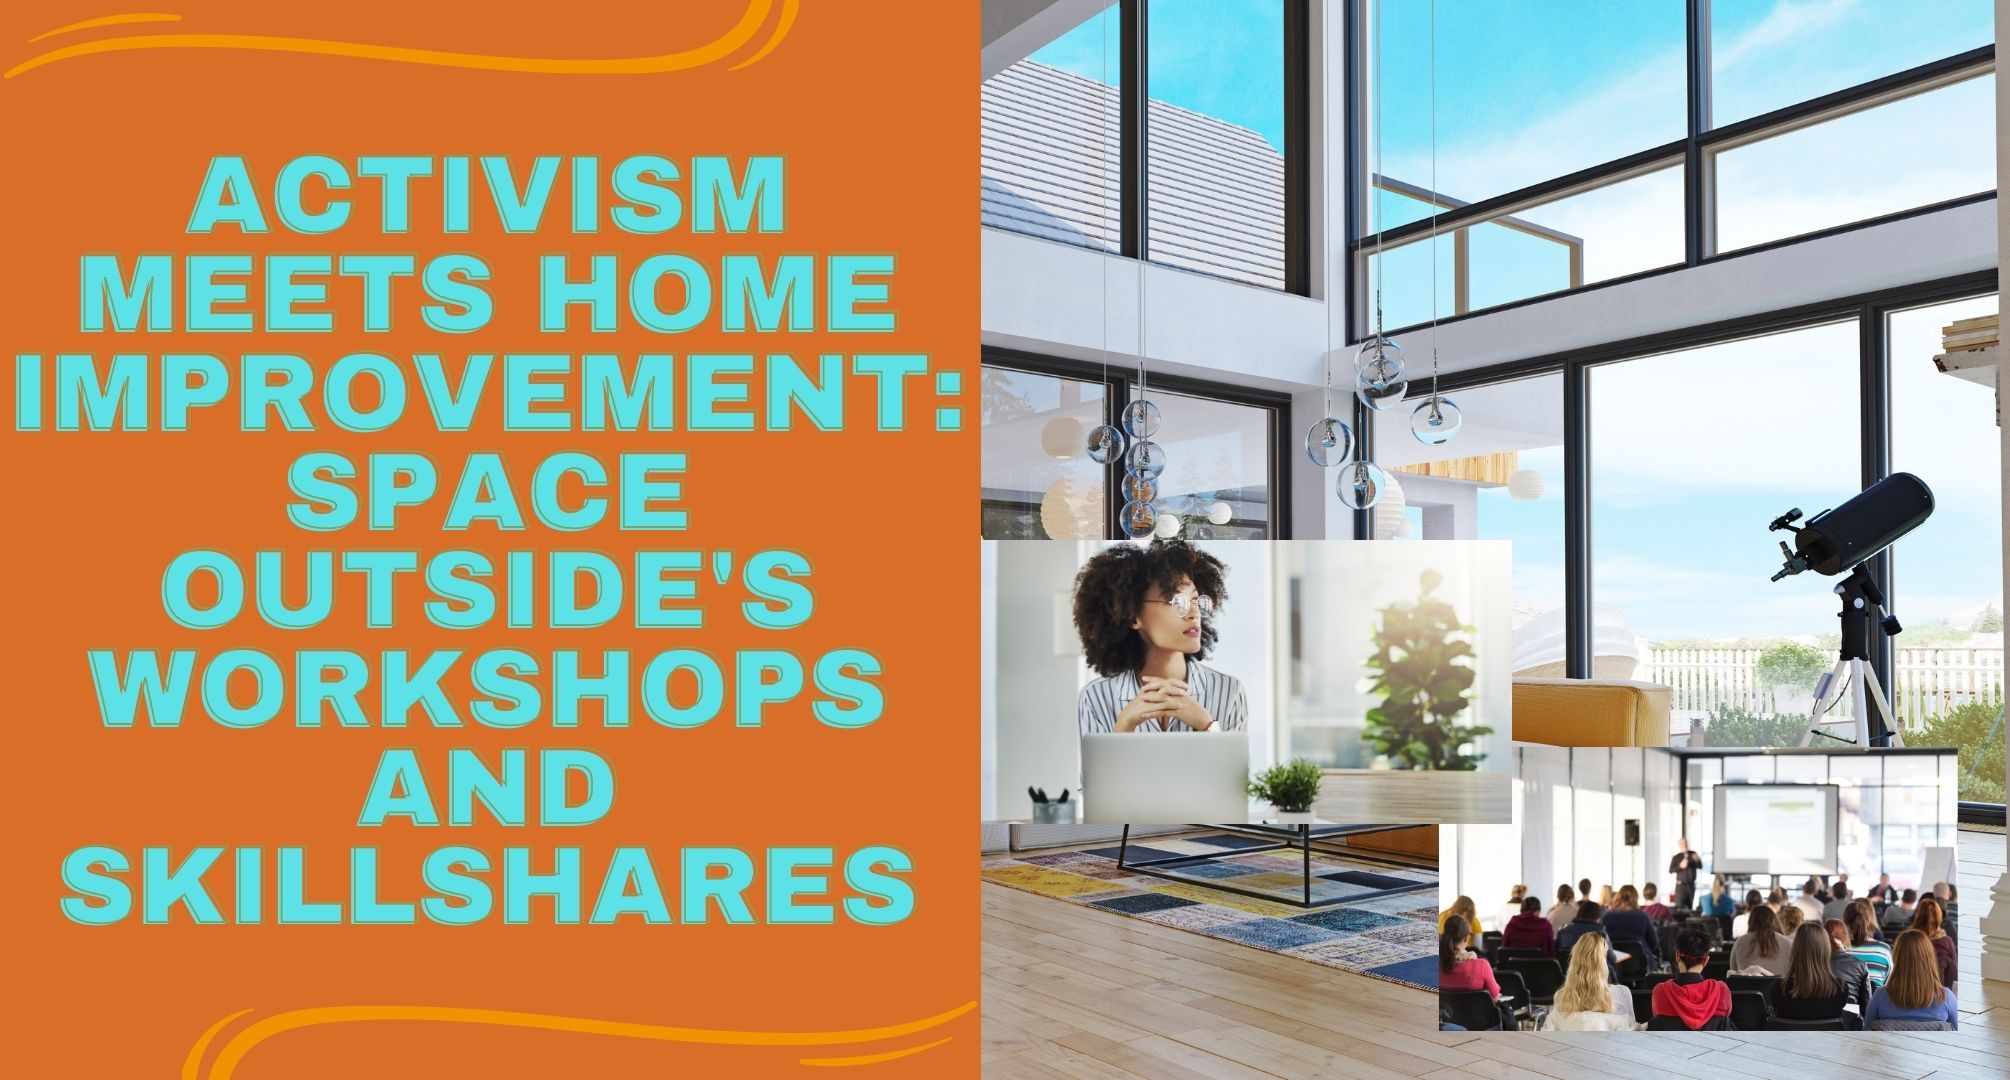 Activism Meets Home Improvement: Space Outside's Workshops and Skillshares